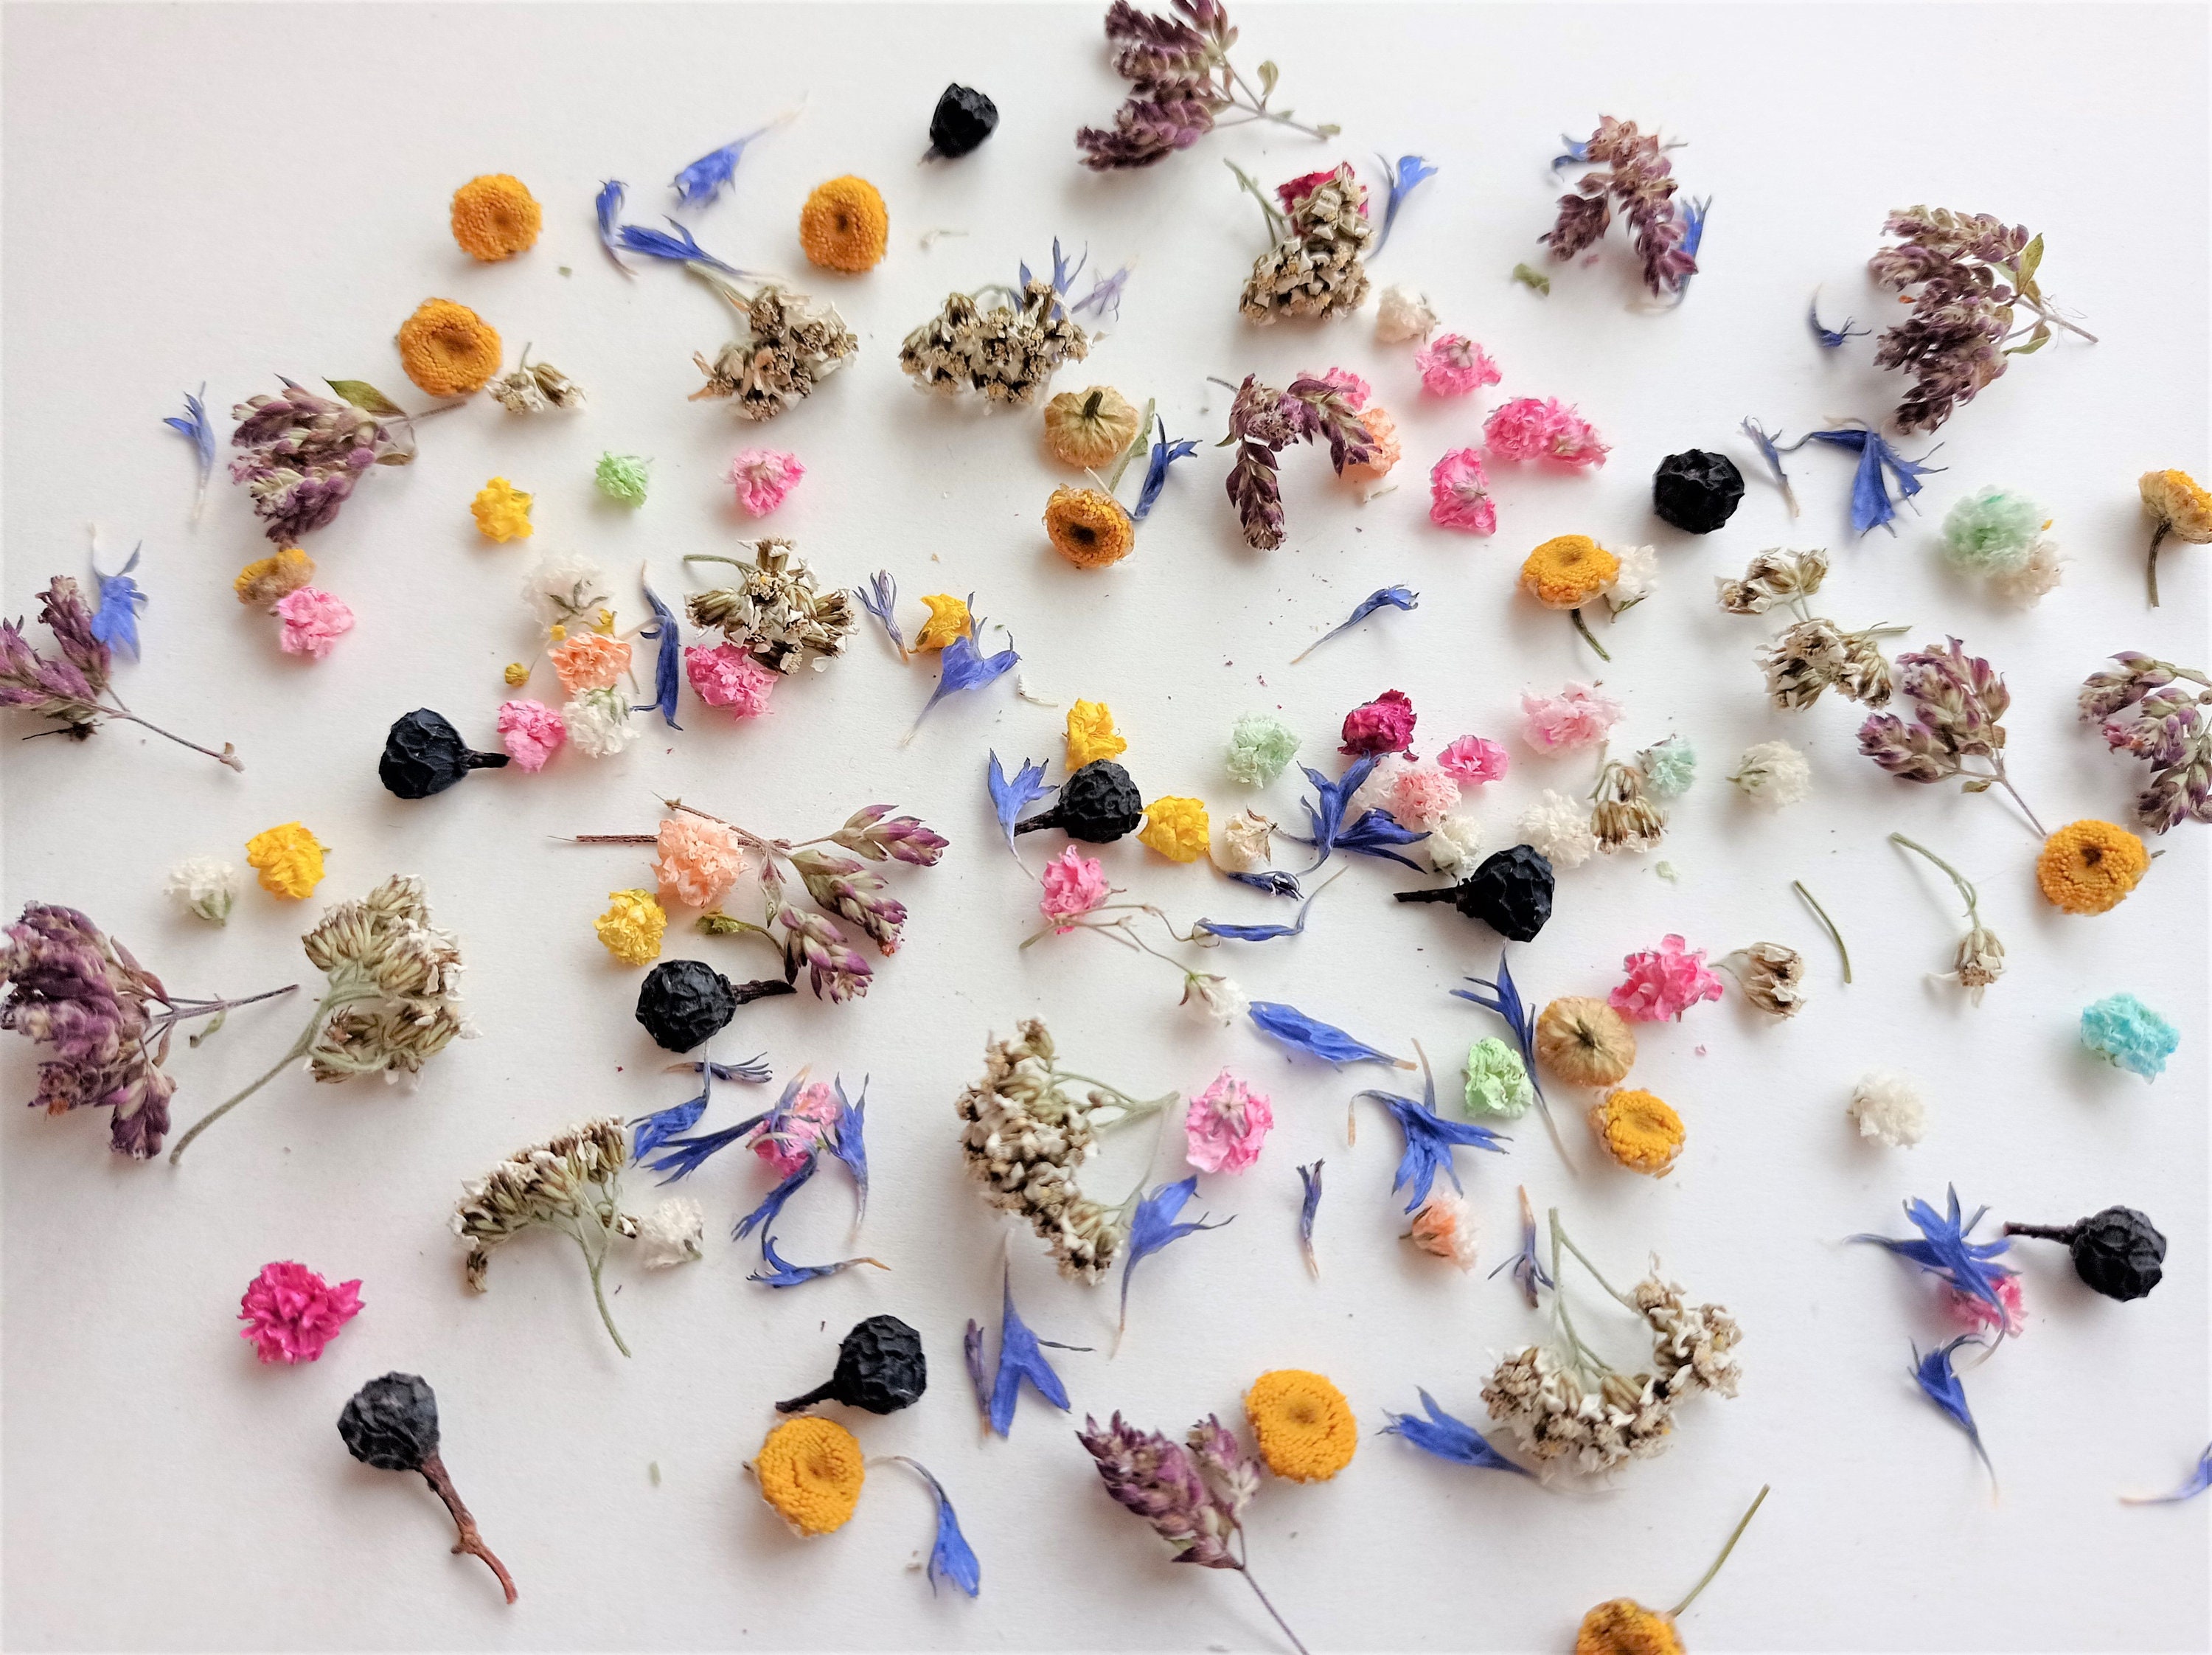 Tiny Mixed Flowers for Crafts 50ml Box, Dried Mini Flower Set for Crafts,  Small Flower Set 